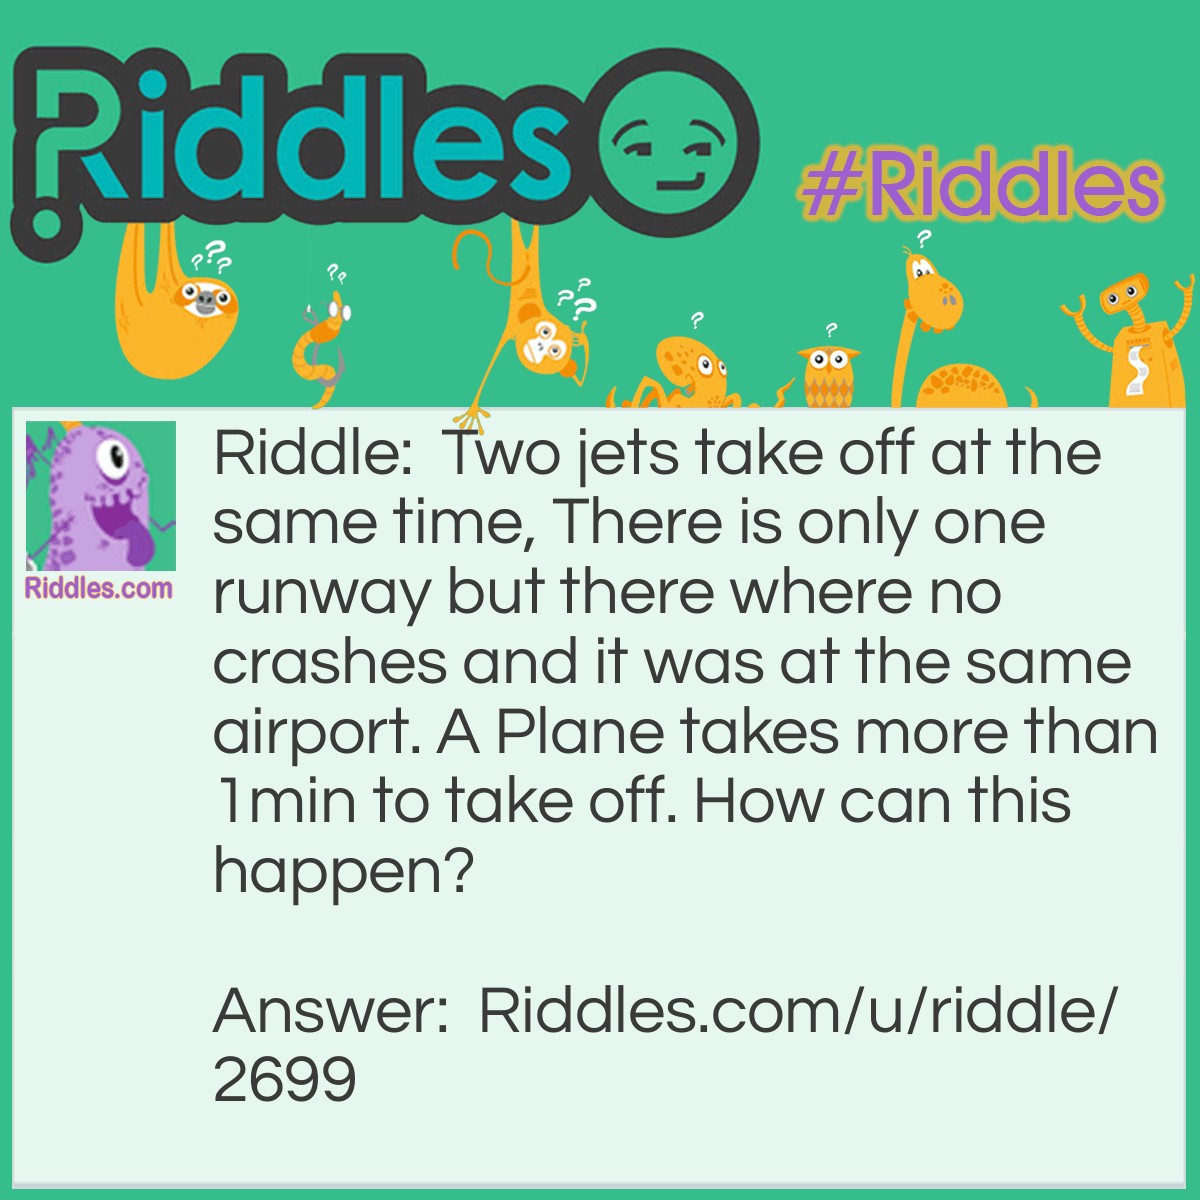 Riddle: Two jets take off at the same time, There is only one runway but there where no crashes and it was at the same airport. A Plane takes more than 1min to take off. How can this happen? Answer: They Both Took Of At The Same Time On Different Days